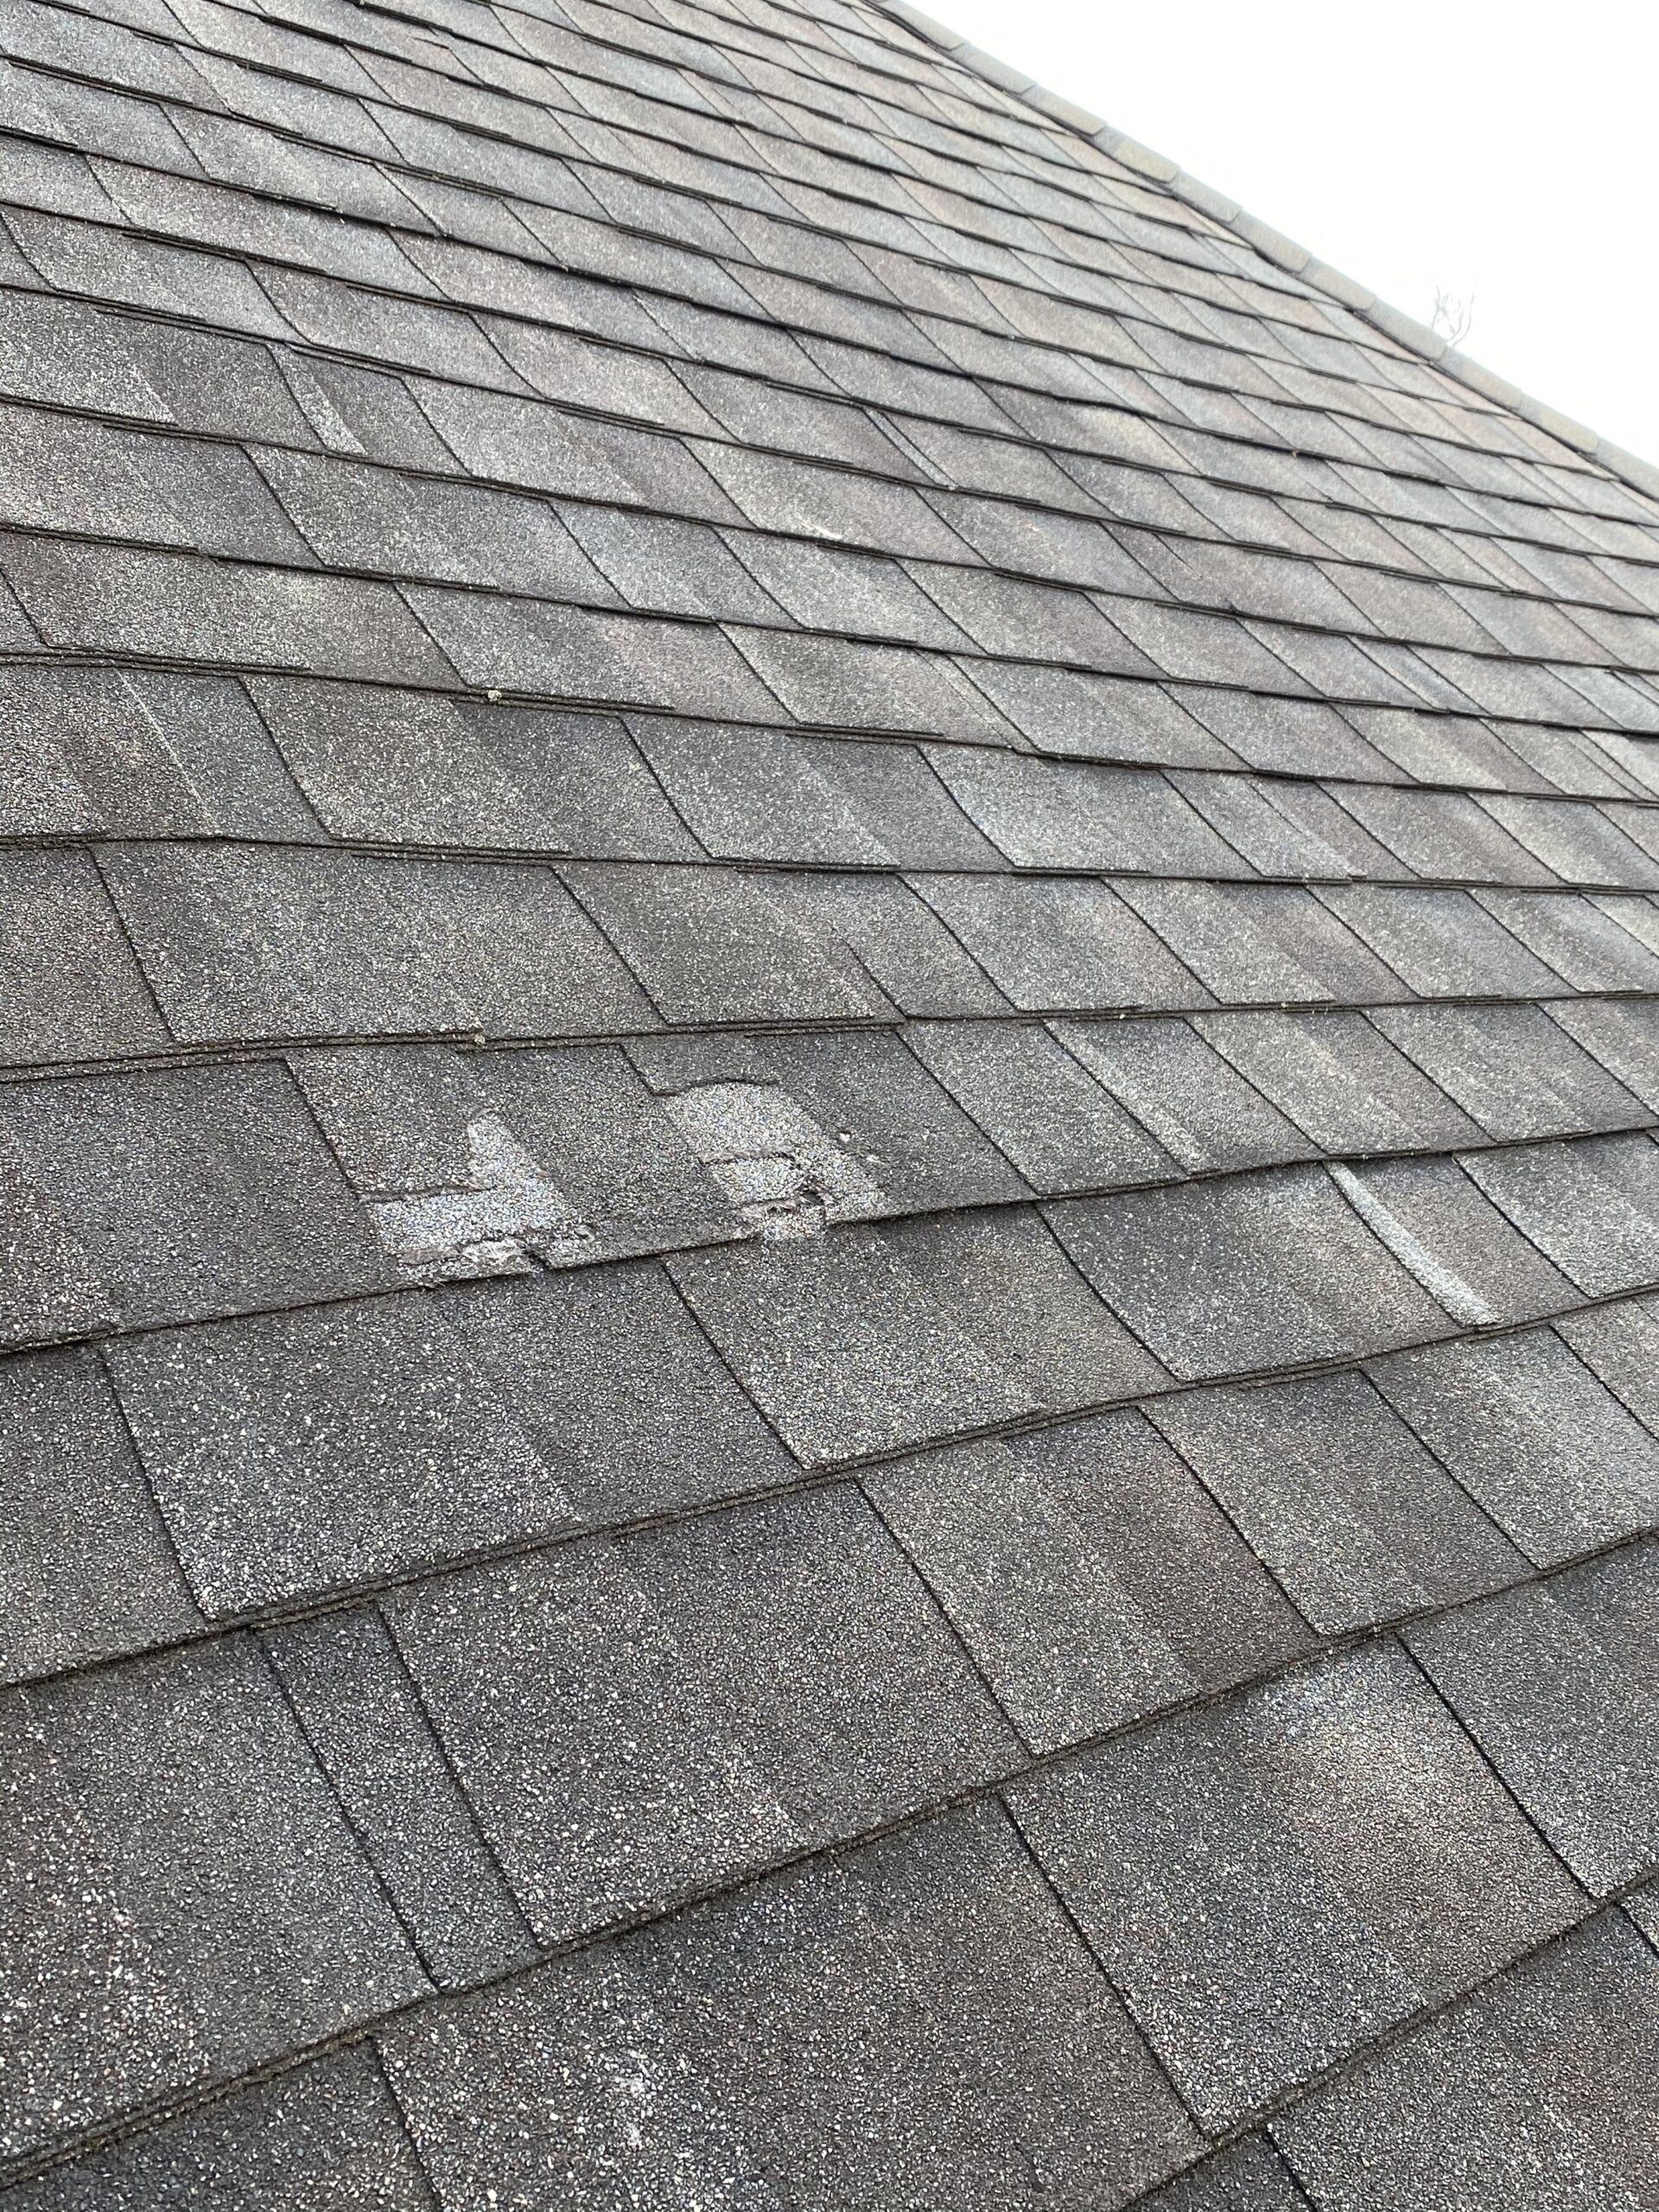 This is a picture of a dark brown shingle that is damaged